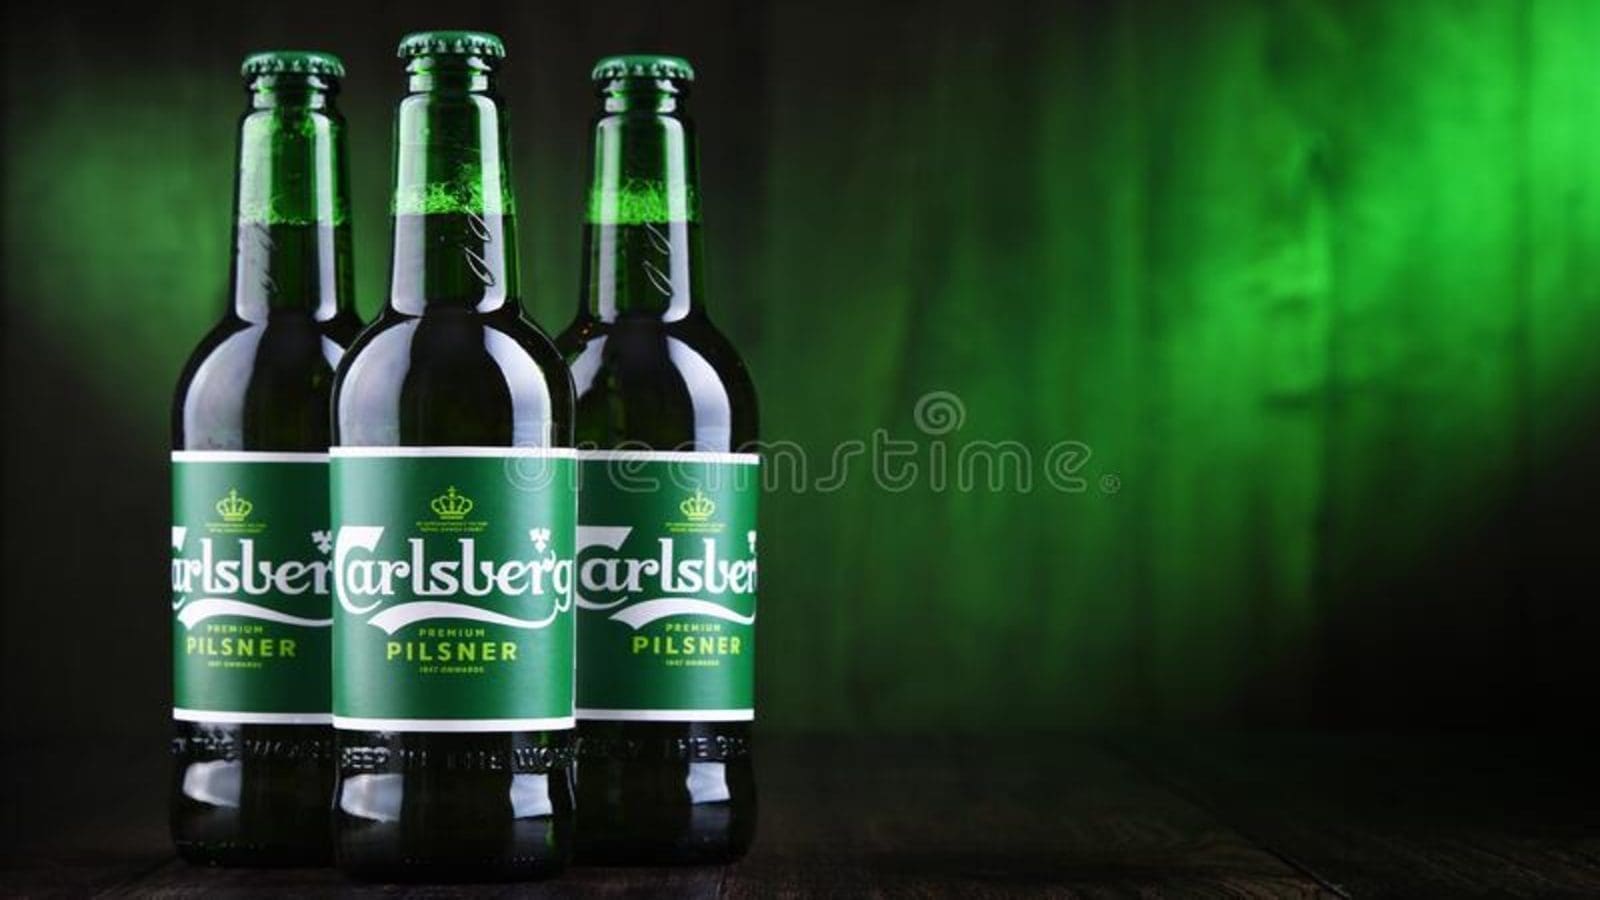 Russia seizes control of Carlsberg assets, putting brakes on planned sale